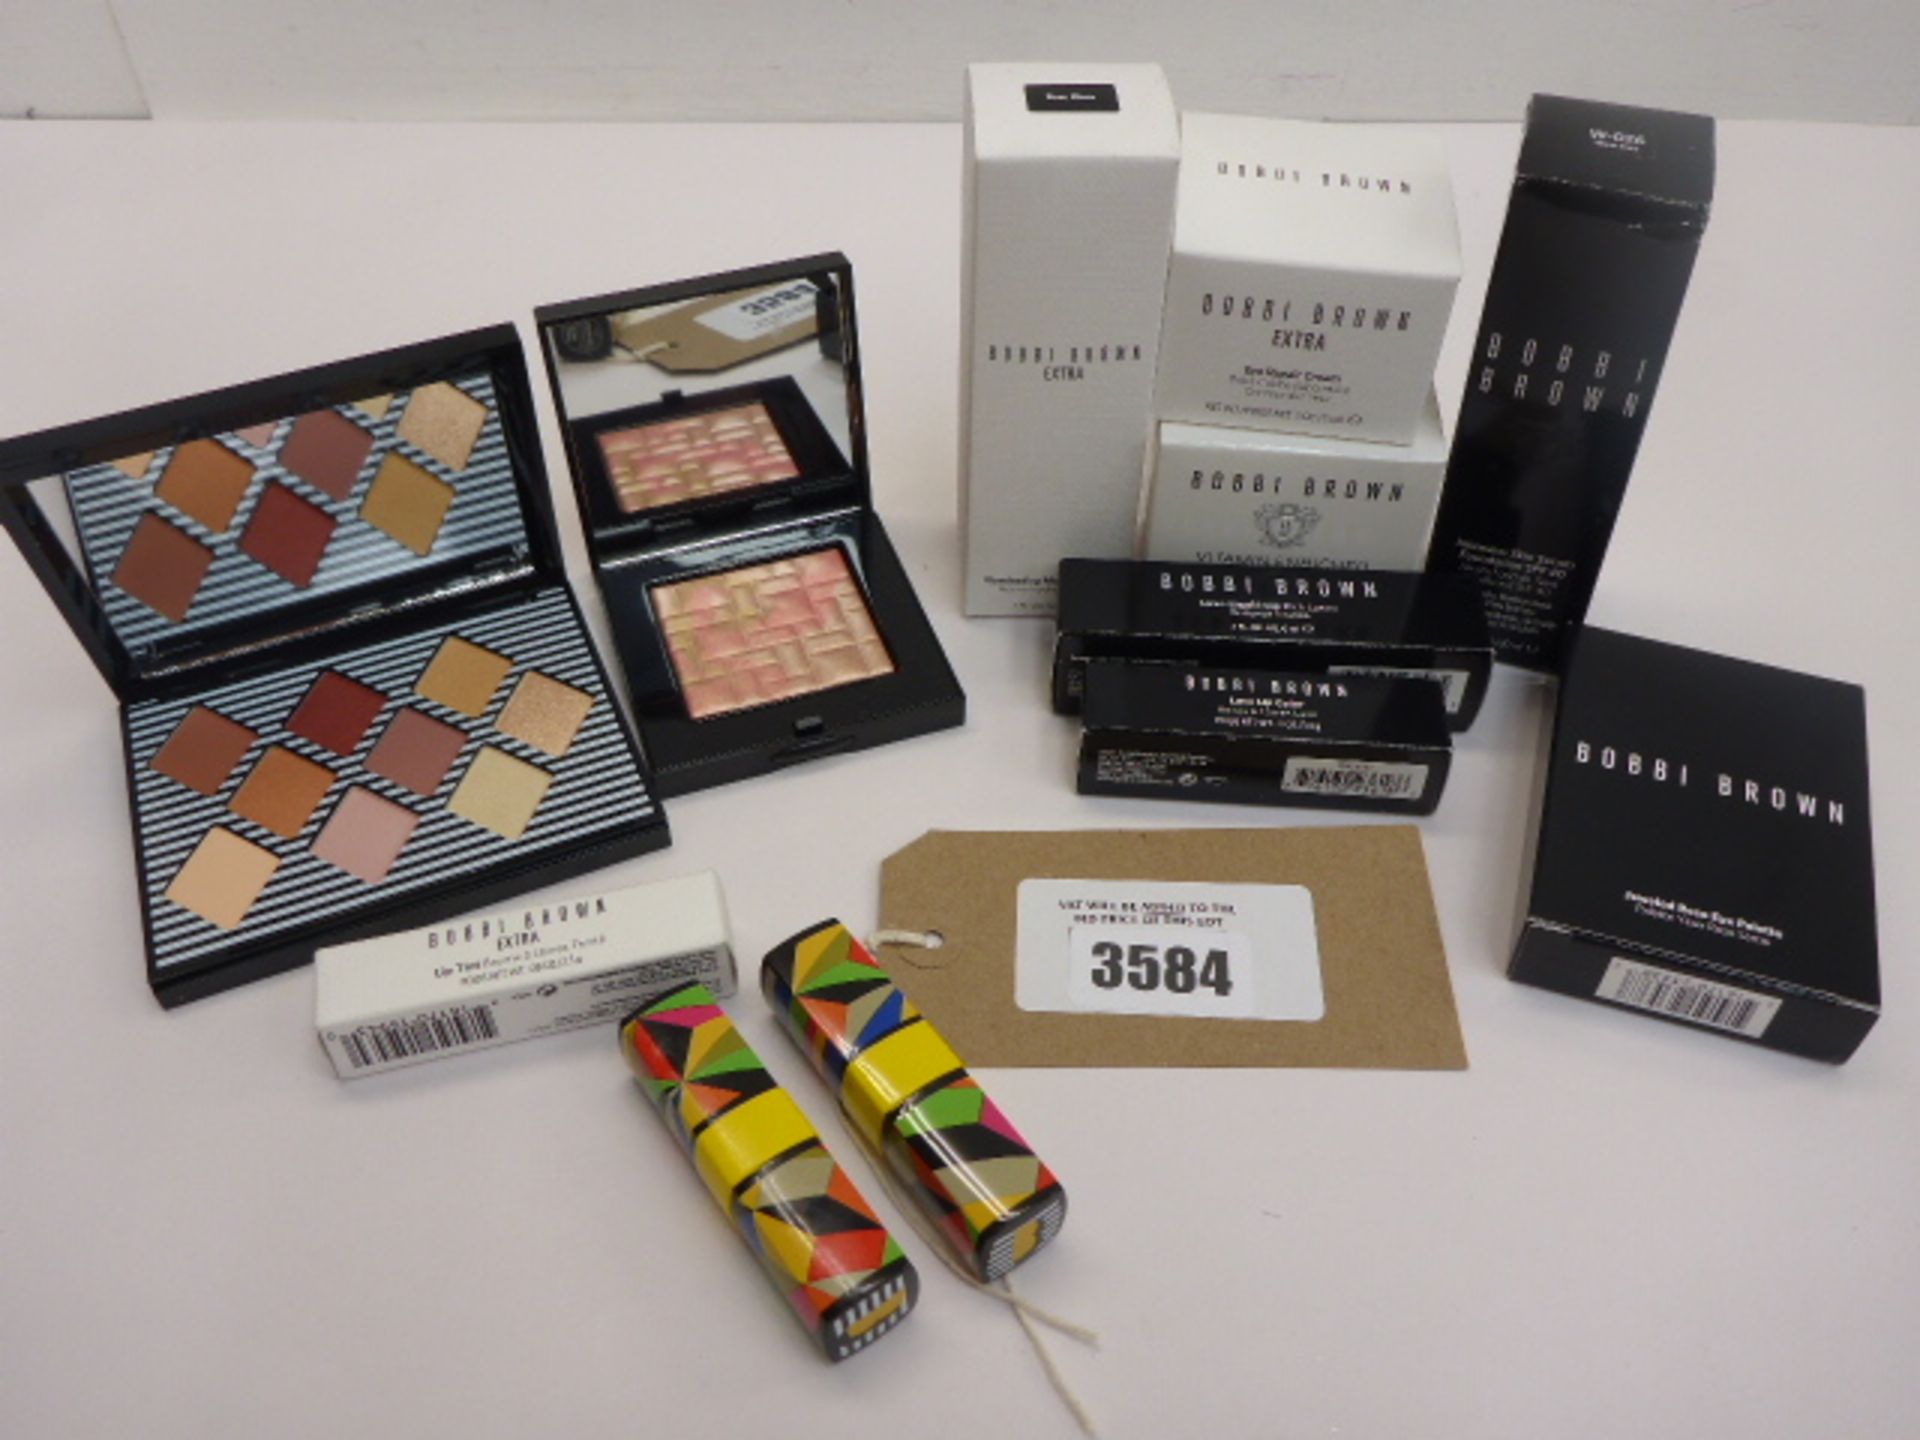 Selection of Bobbi Brown beauty products including moisture balm, enriched face base, eye